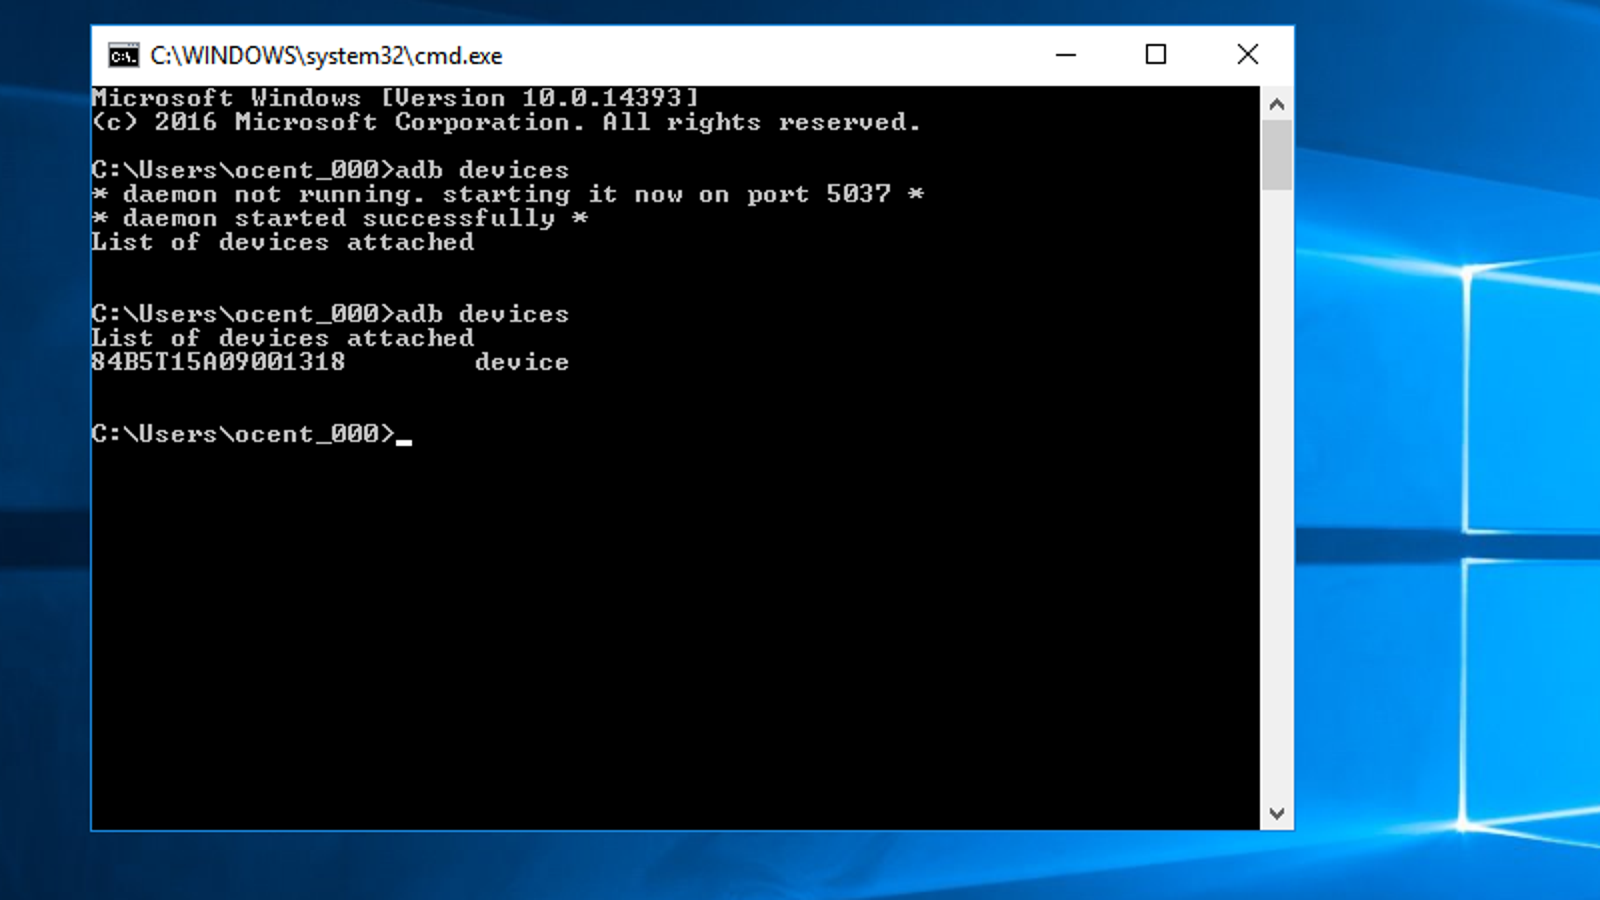 how to install adb and fastboot on windows 7